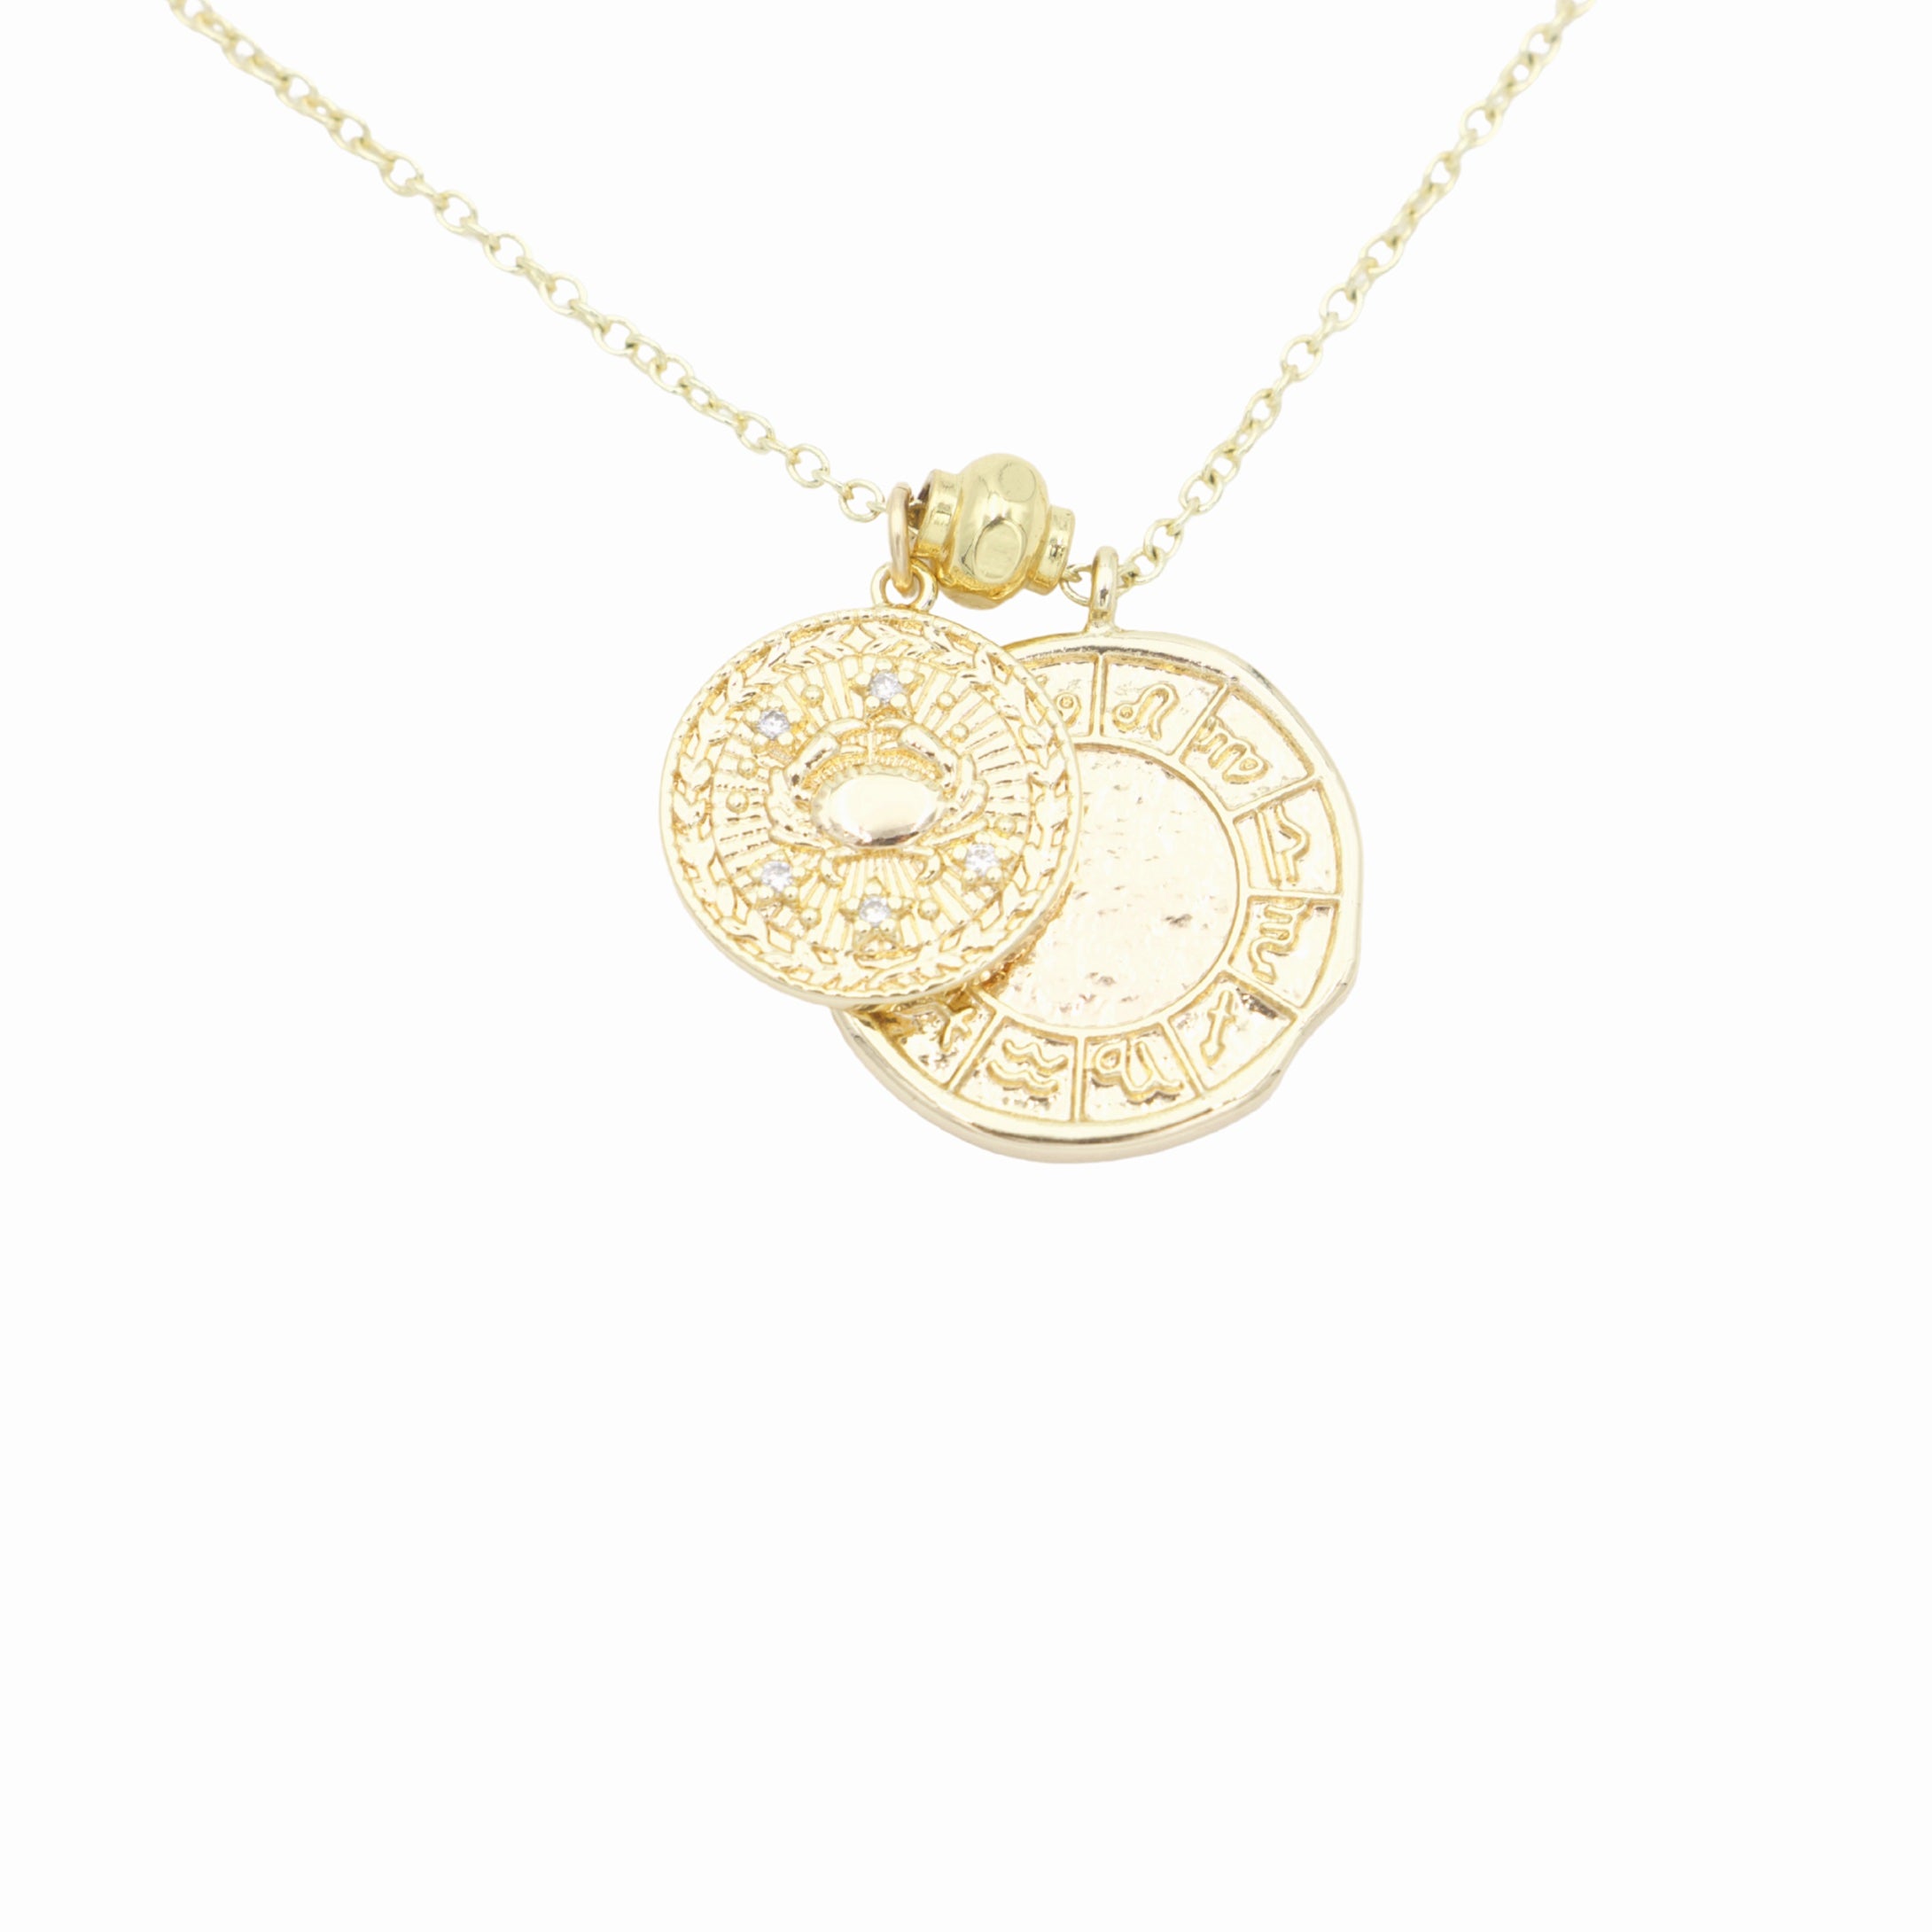 AW Boutique's dual zodiac coin necklace featuring a dainty necklace chain, zodiac rustic coin charm, and your chosen star sign coin charm. Charms separated by a gold bead. Part of the Celestial Collection. Gold filled jewellery. Option shown is Cancer.